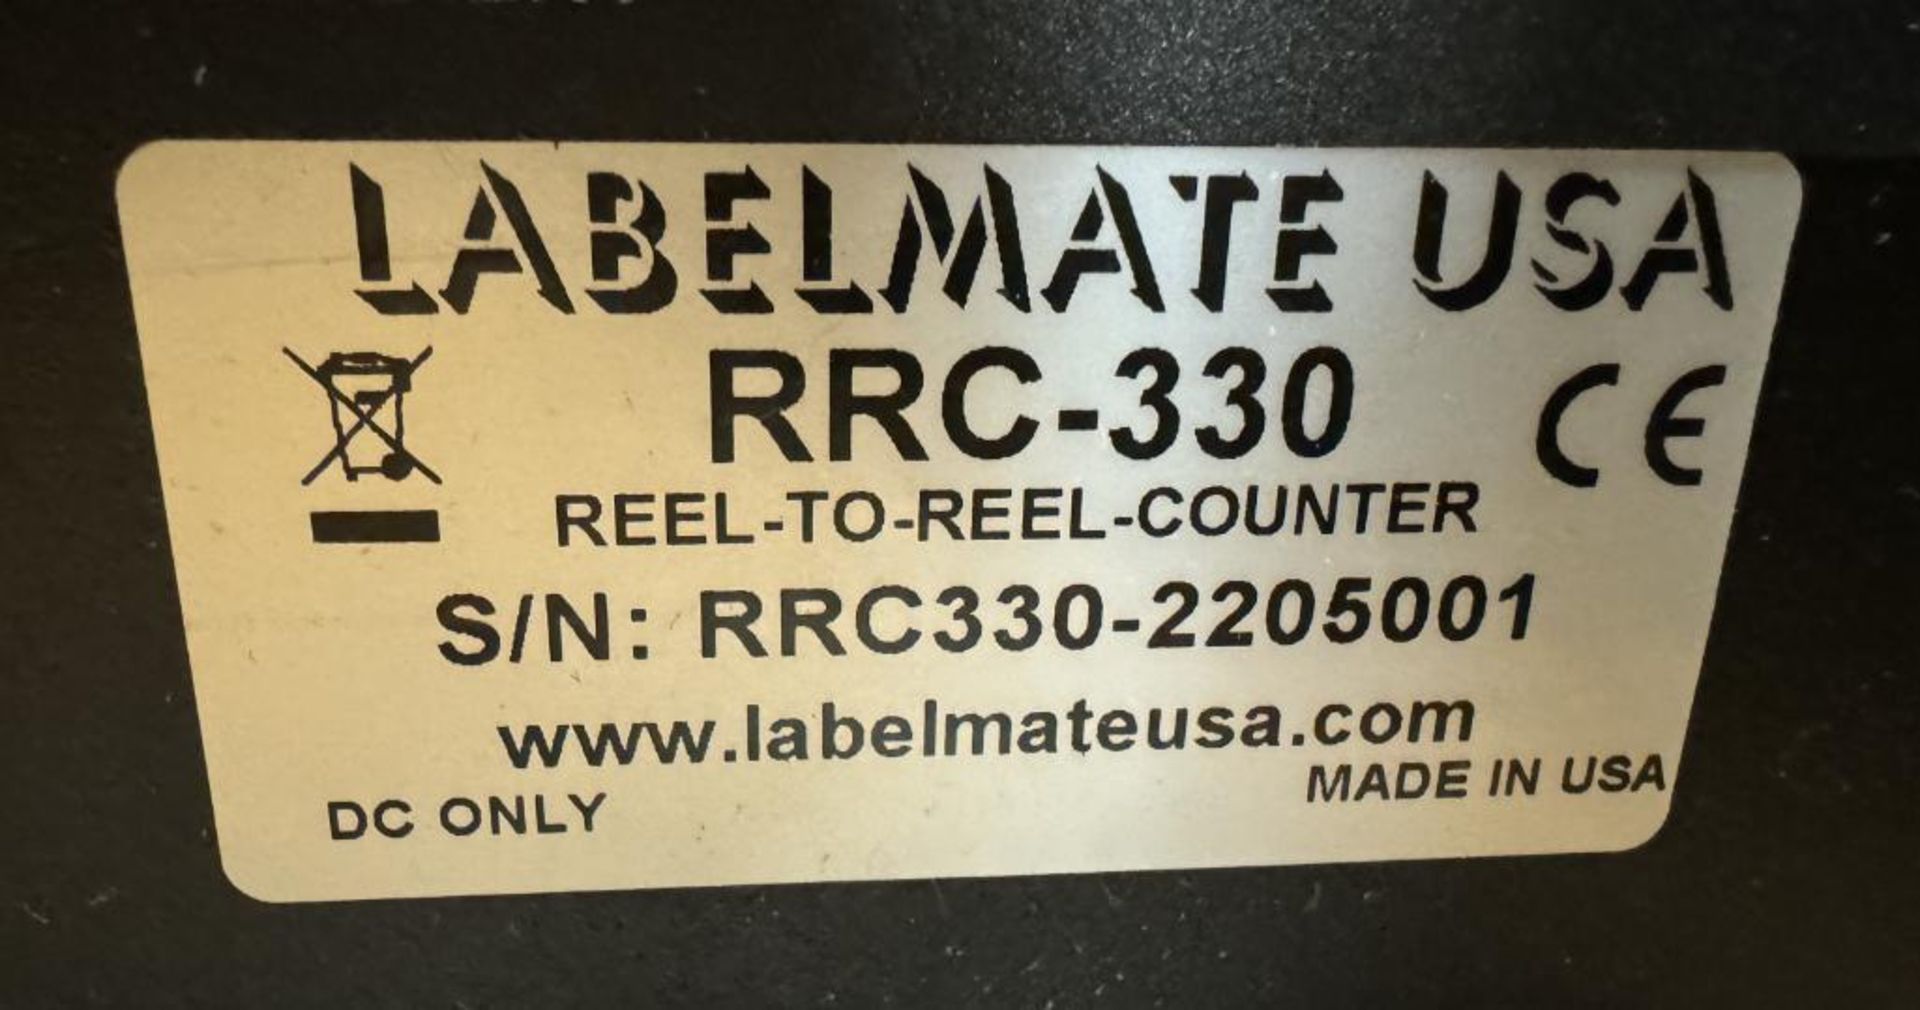 Lot Consisting Of: (1) Zebra ZT410 Printer, (2) Labelmate RRC-330 Reel To Reel Counters. - Image 6 of 8